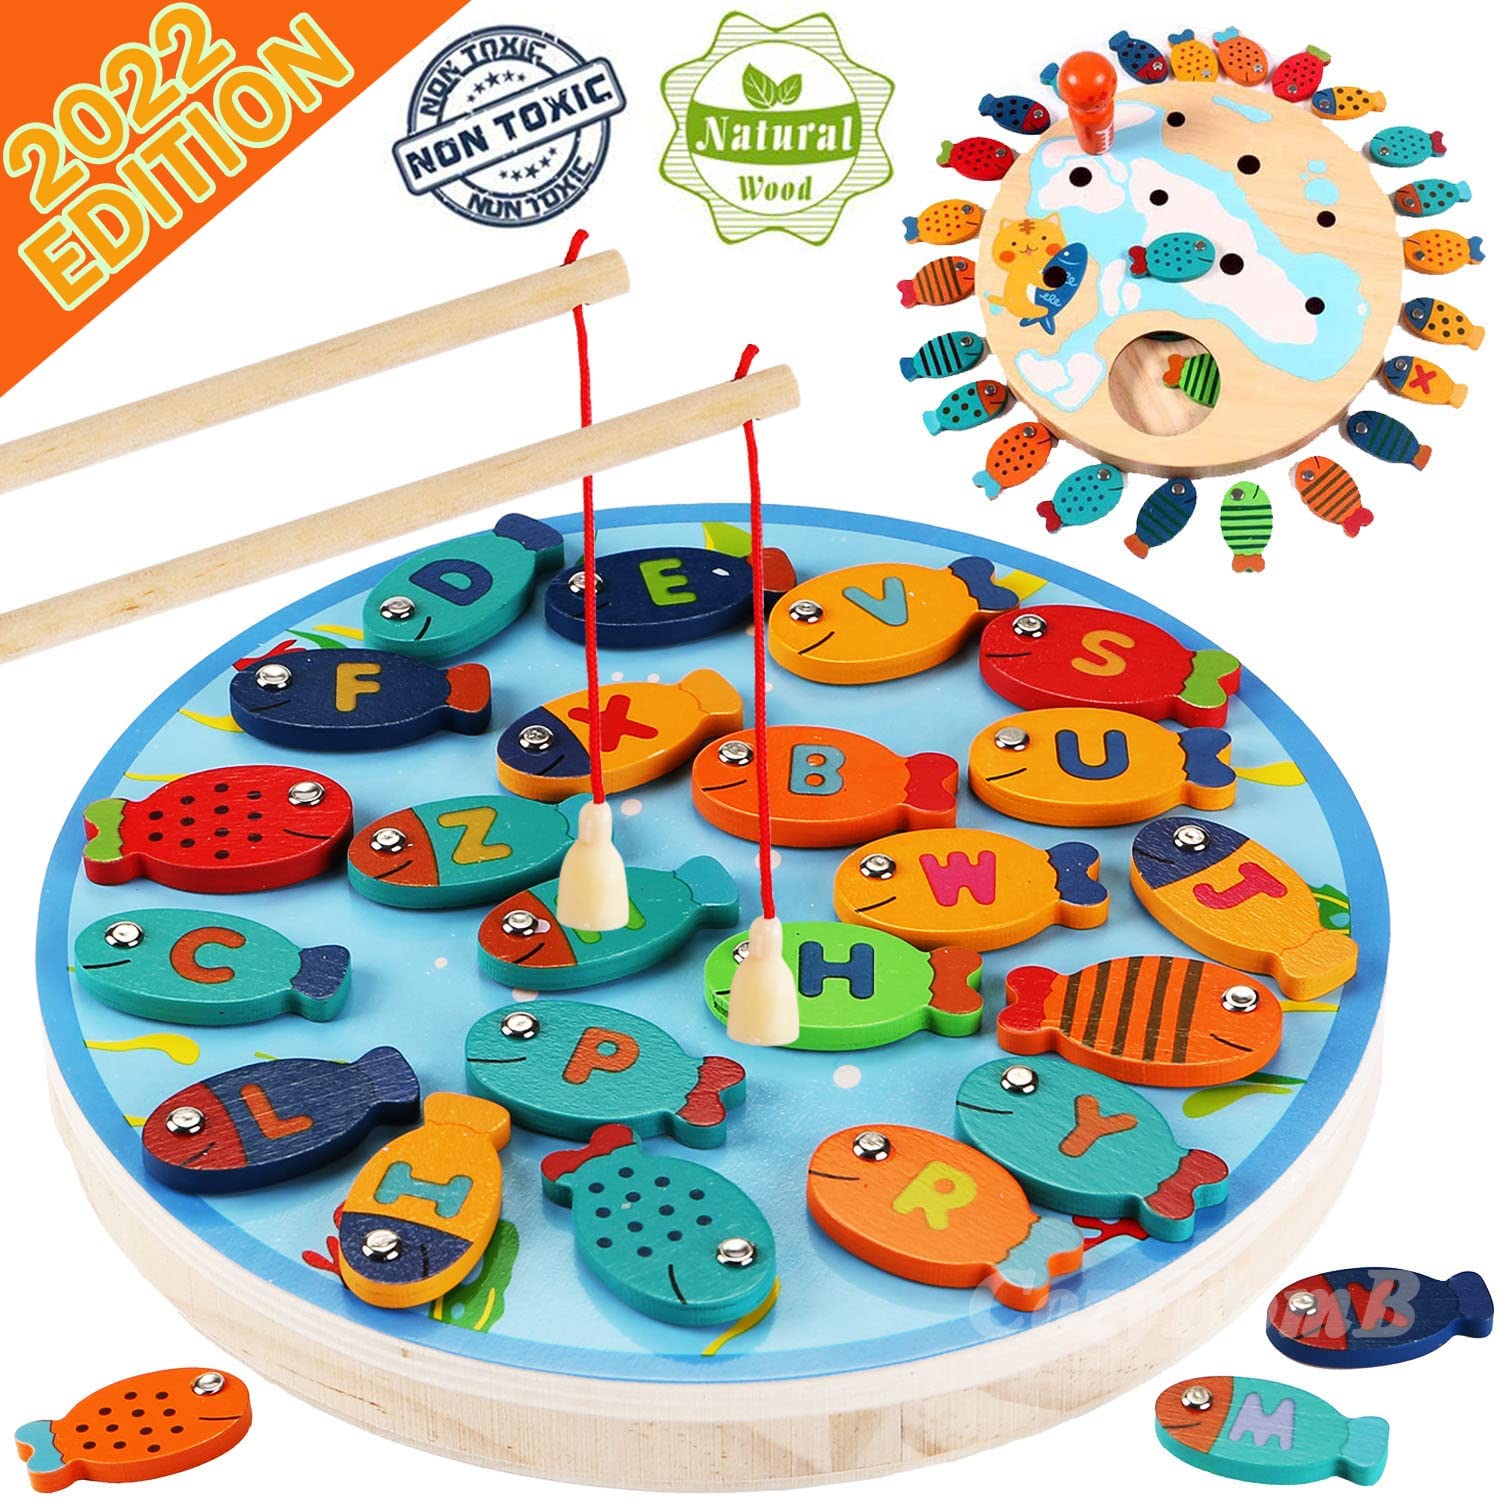 Magnetic Fishing Game - Wood FSC Certified Rose